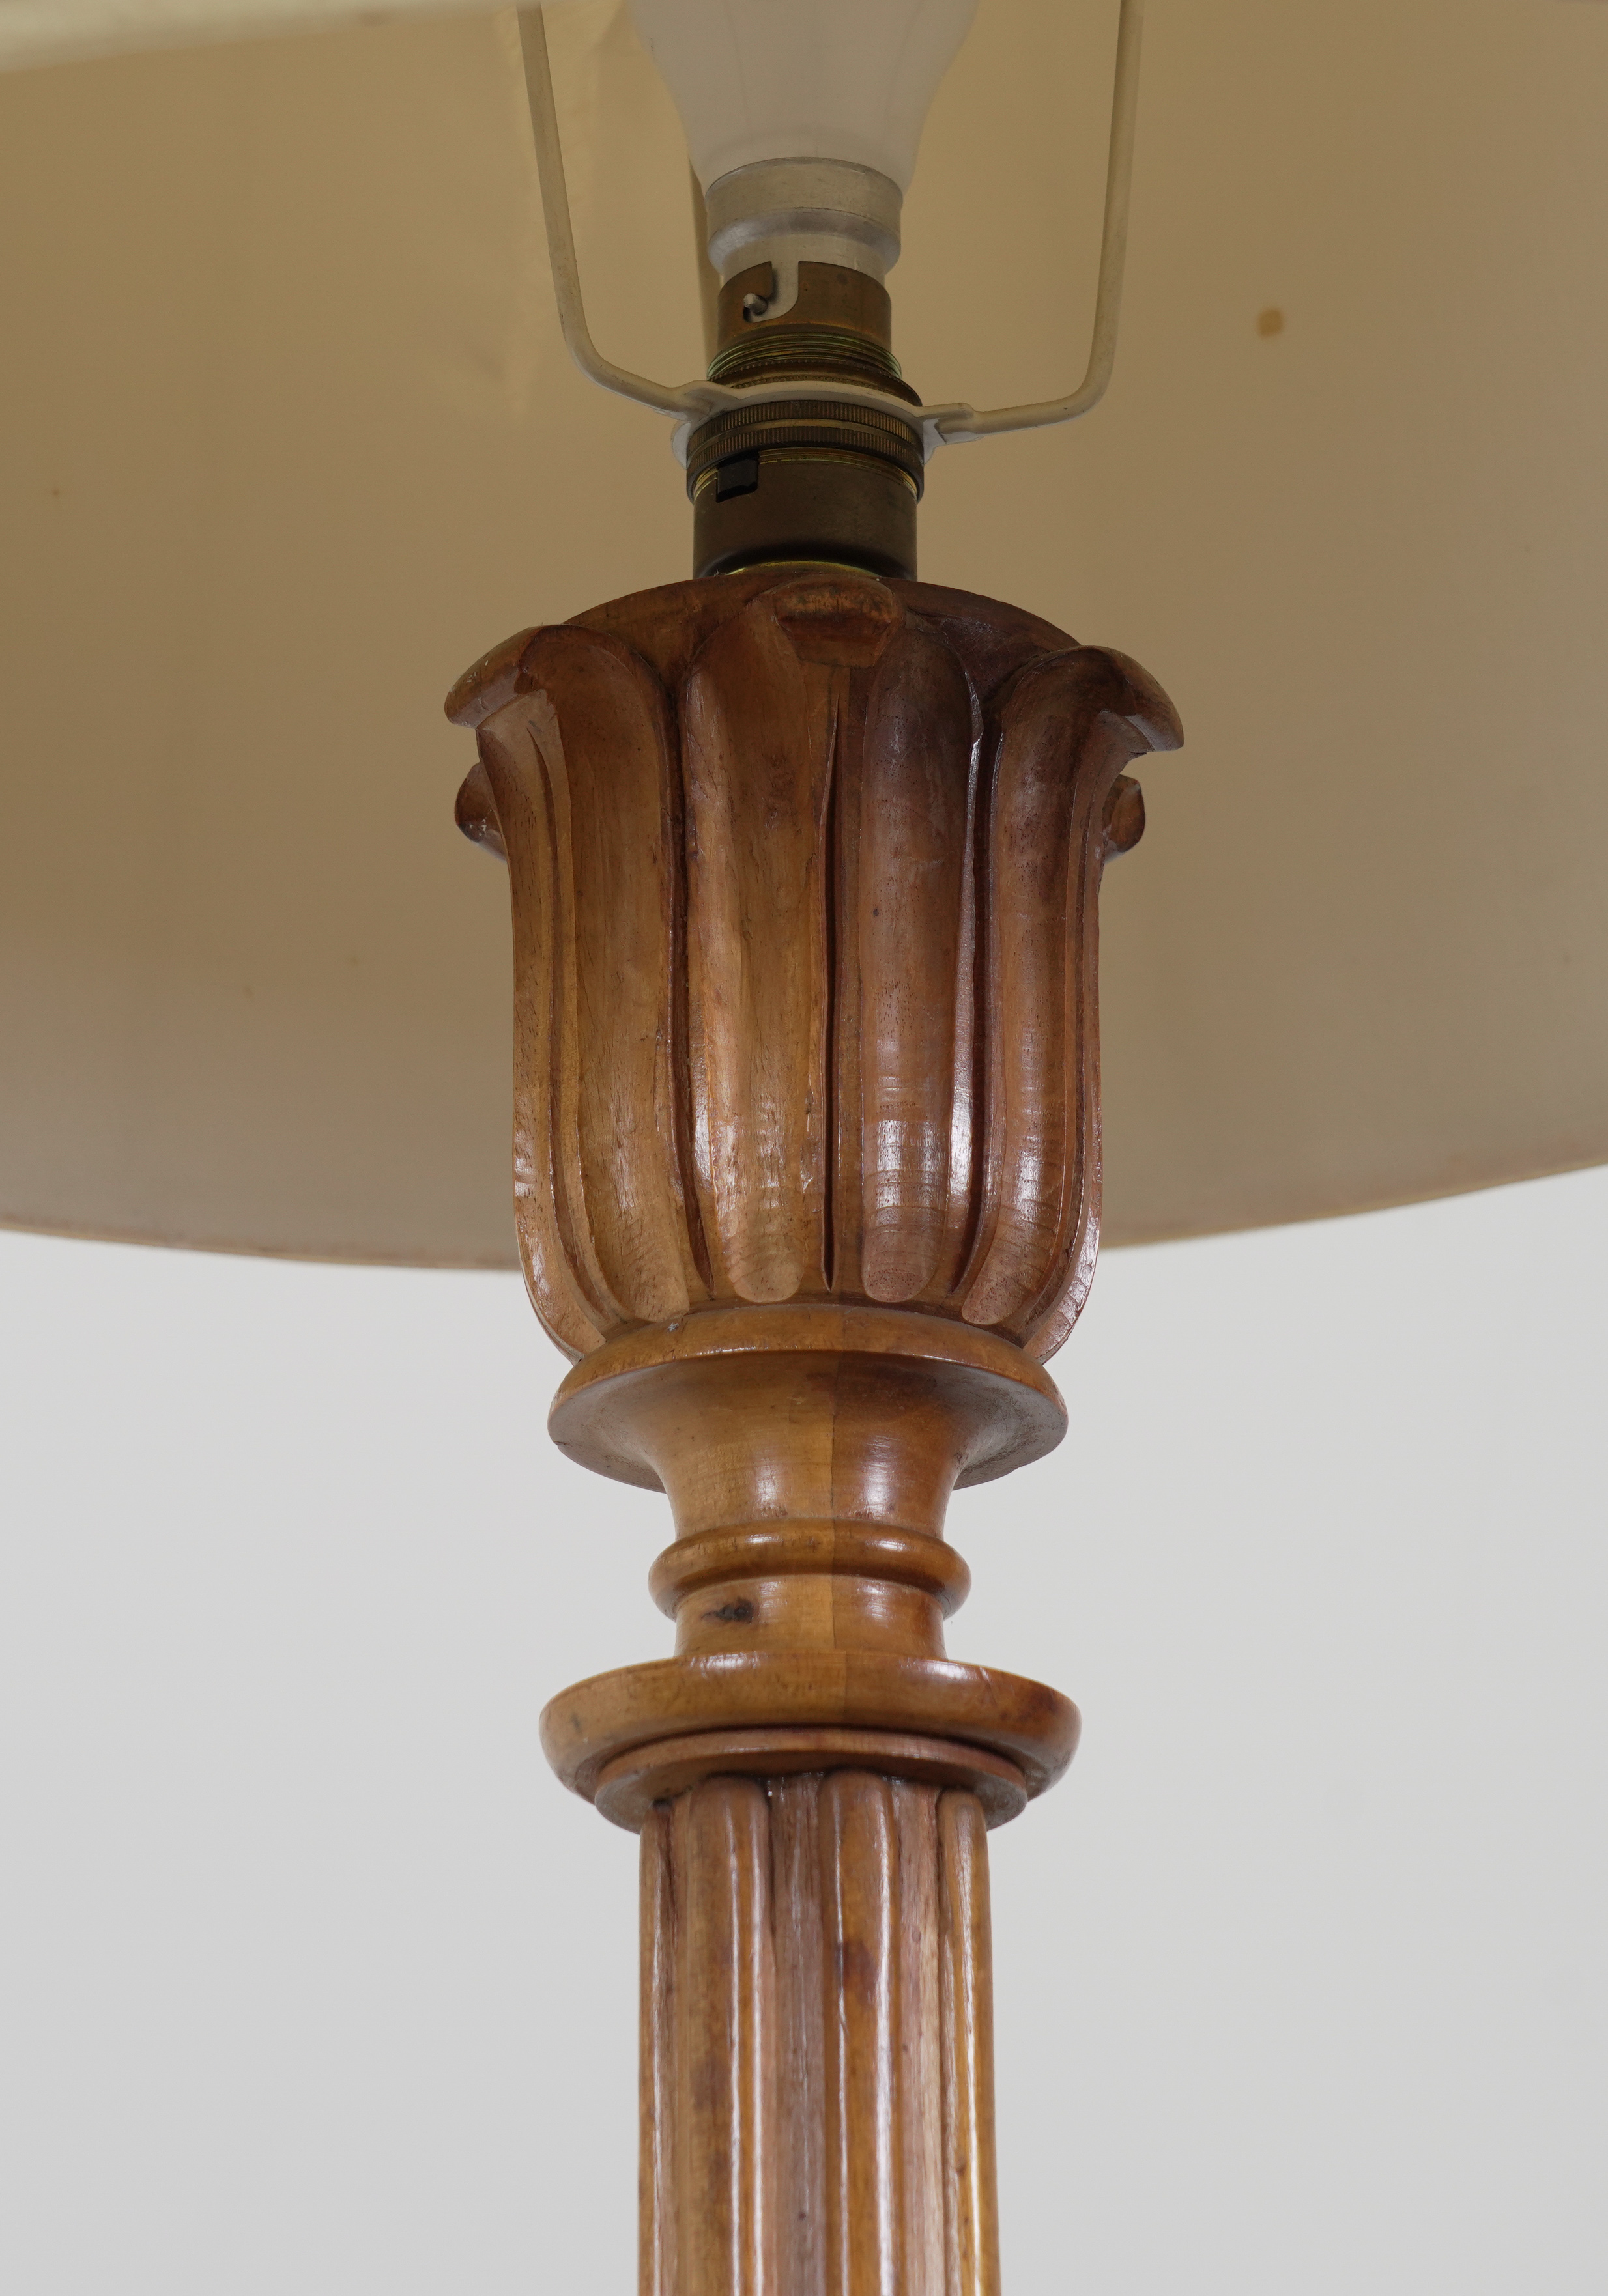 AN EARLY 20TH CENTURY FRENCH CARVED WALNUT STANDARD LAMP - Image 3 of 3